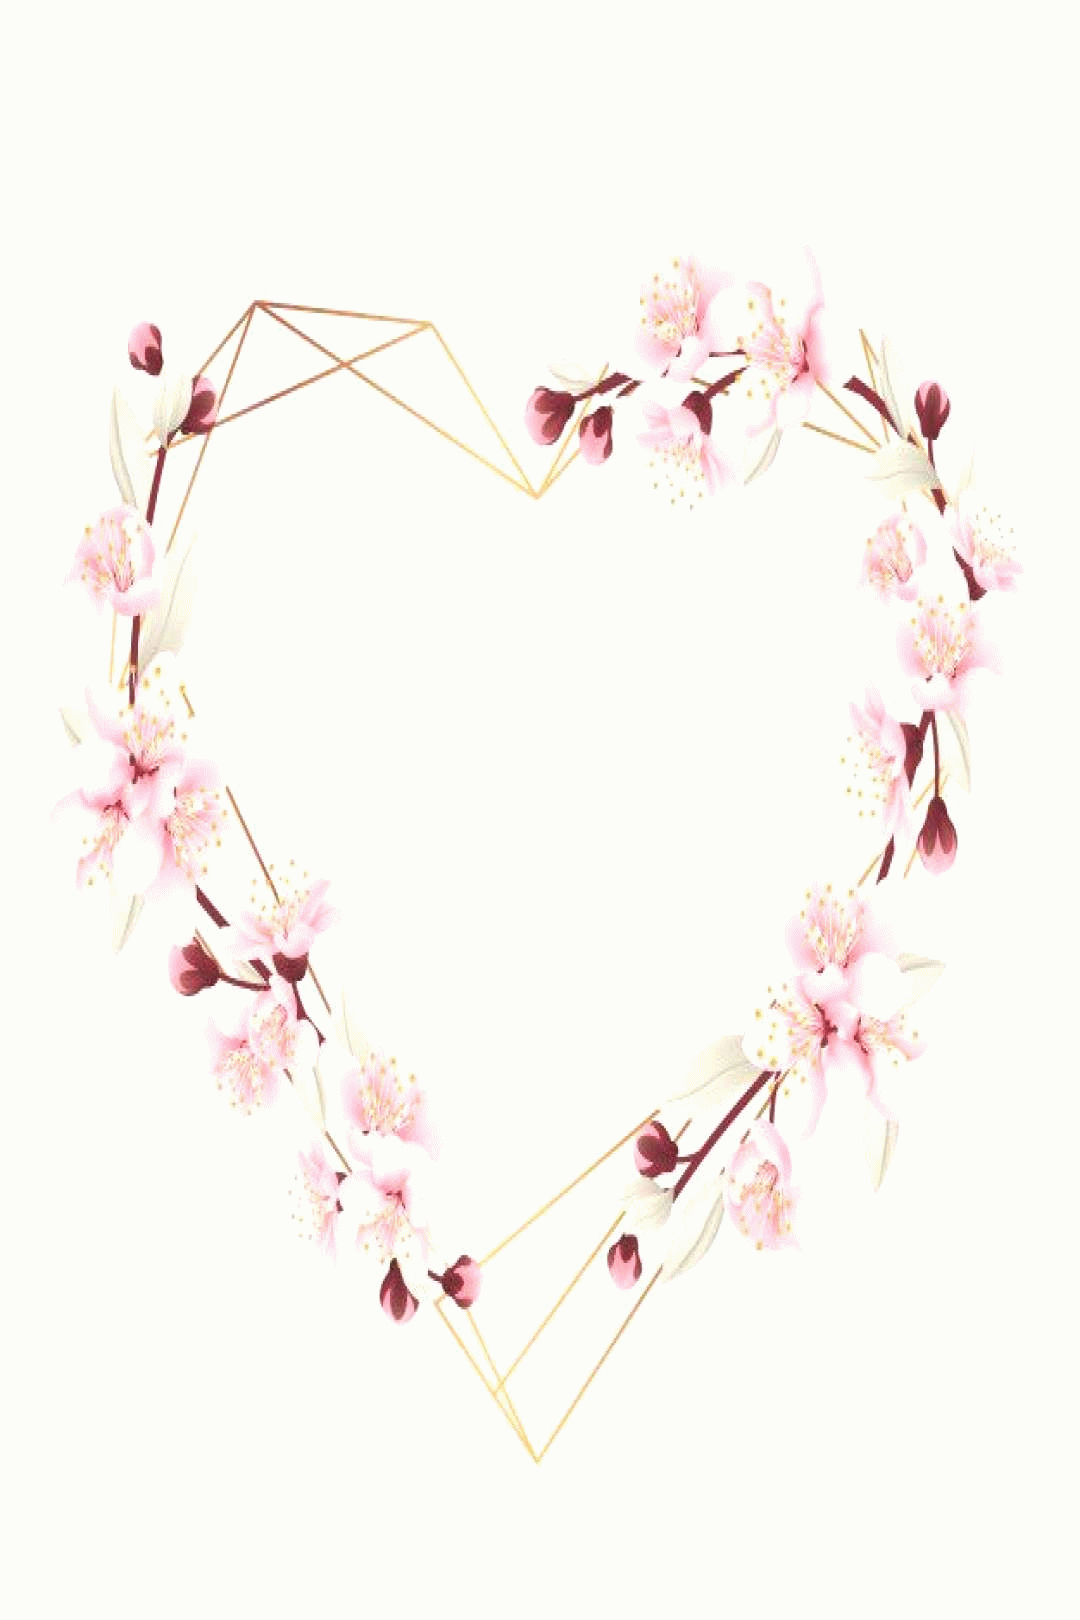 love floral frame background with cherry blossoms download small